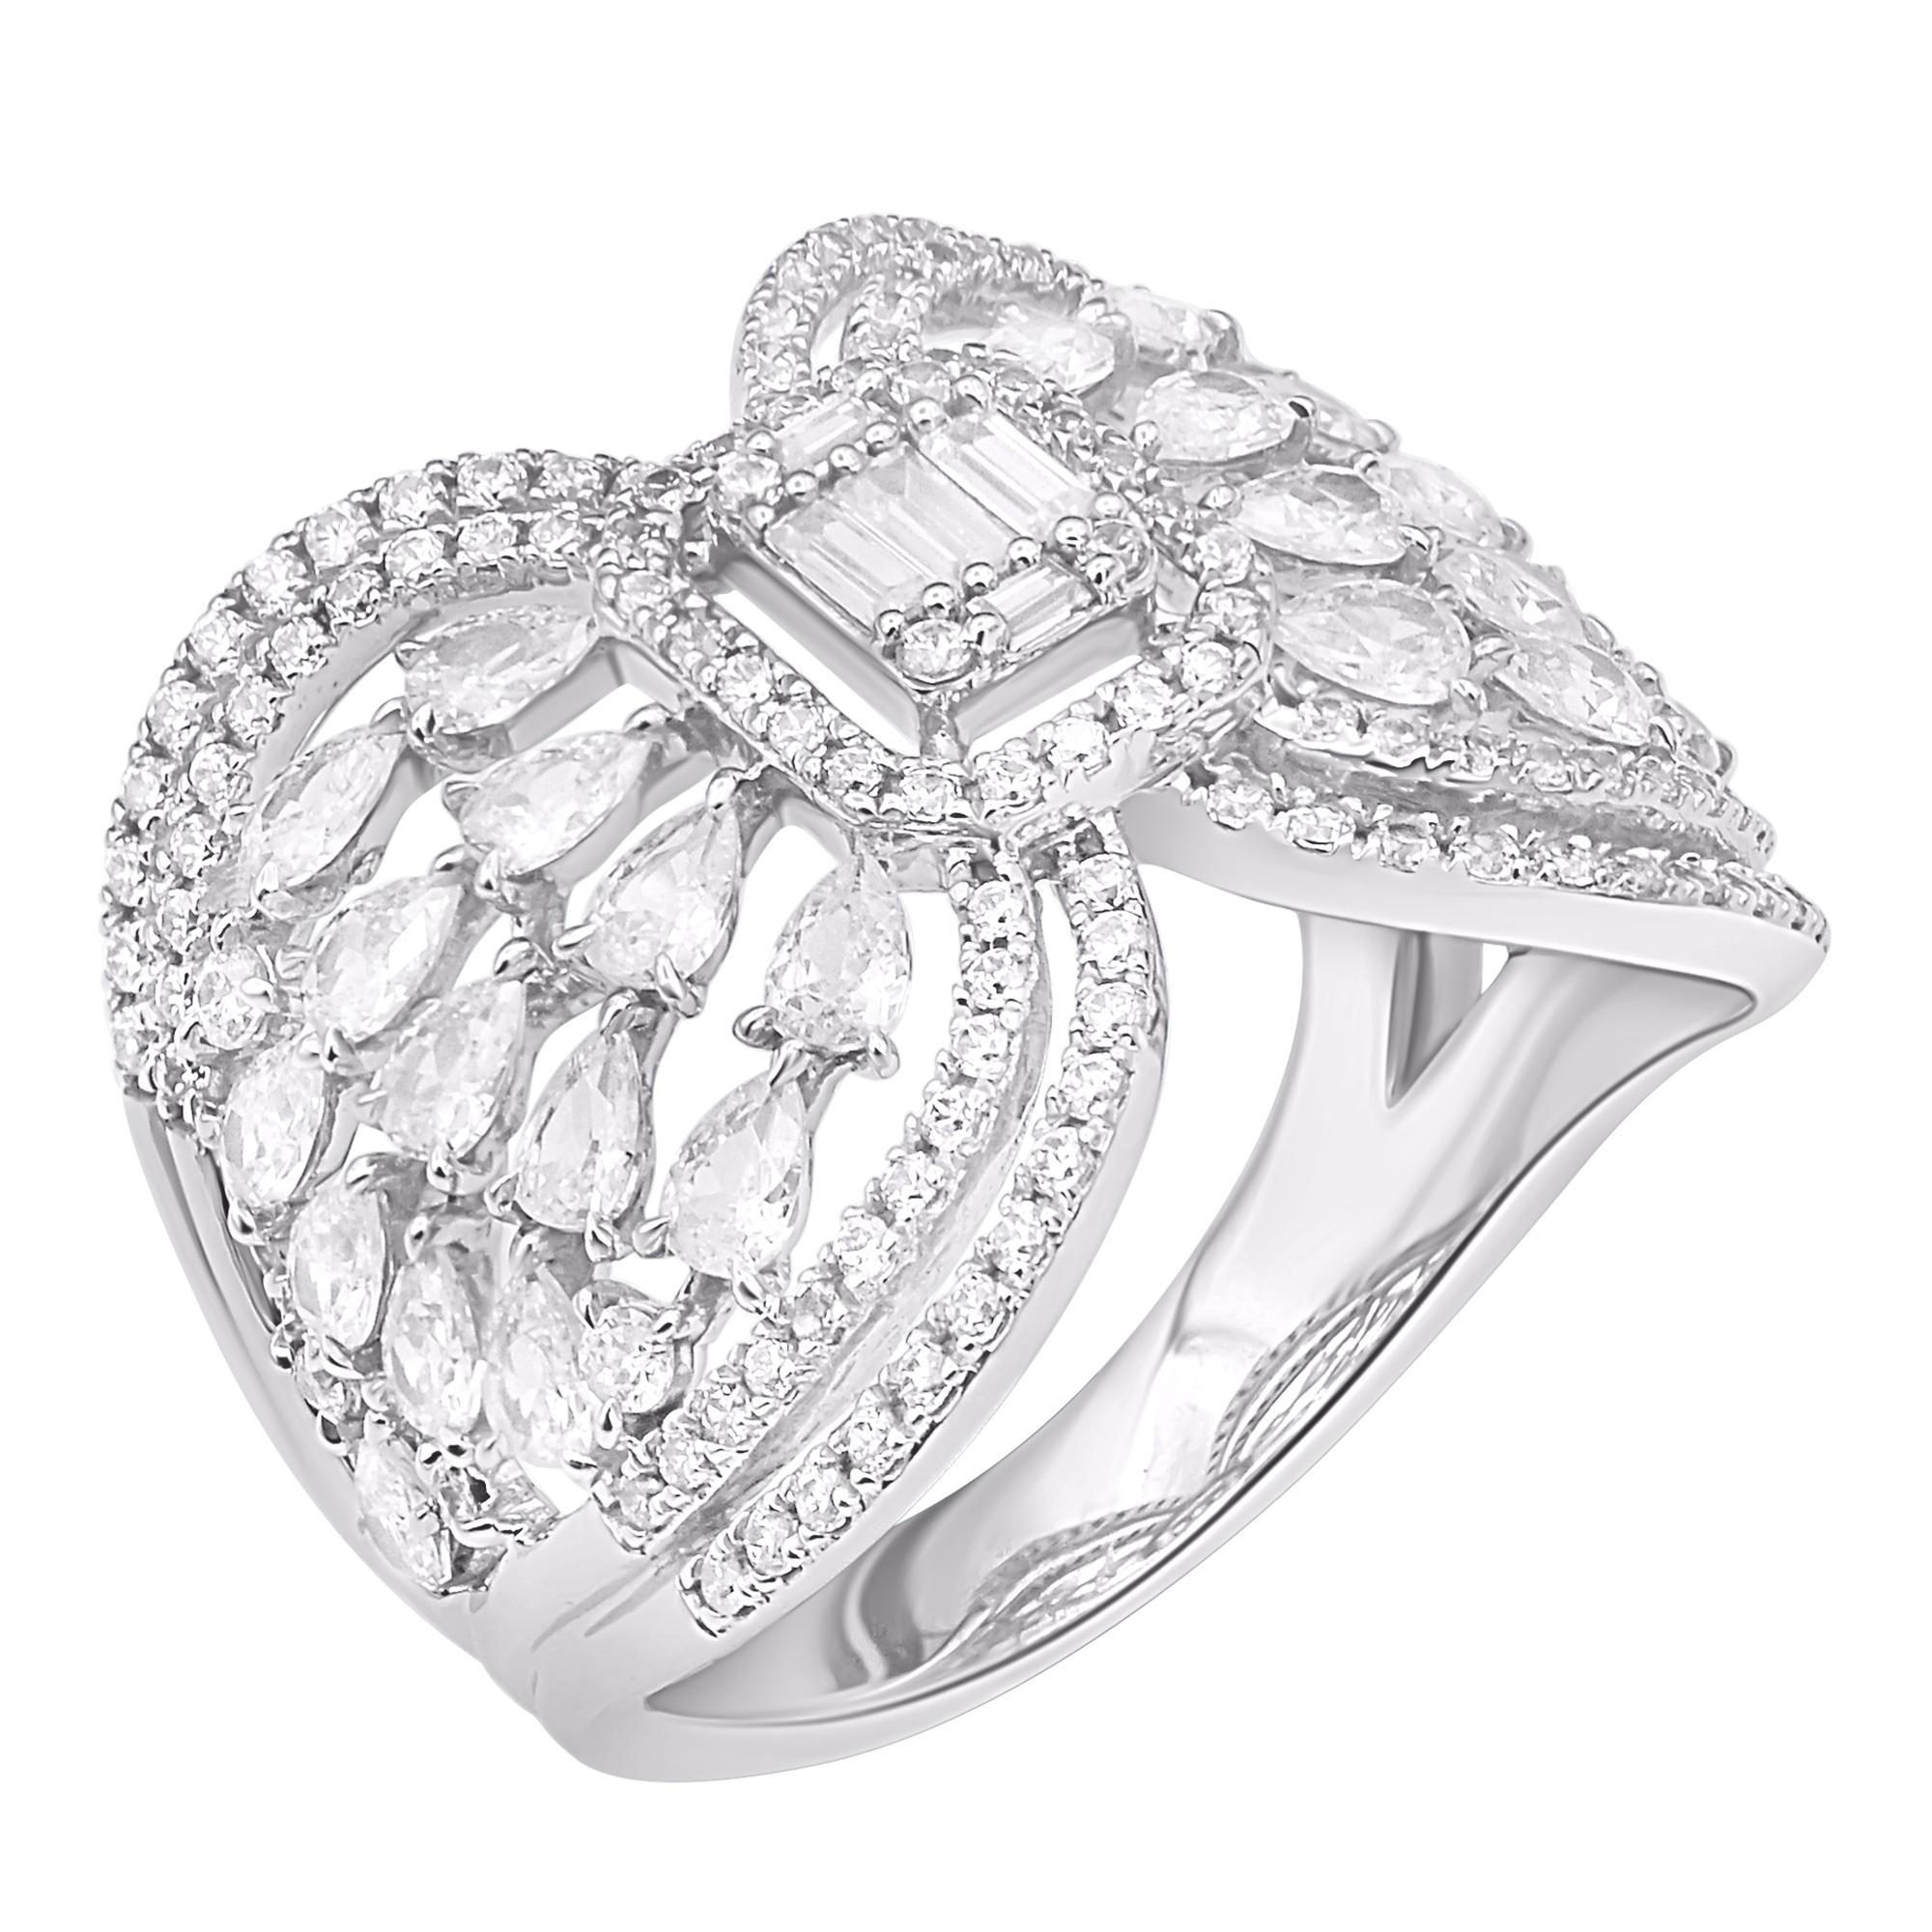 Make your most special and precious day shine with this cocktail ring. Beautifully crafted by our inhouse experts in 14 karat white gold and embellished with 159 brilliant cut round diamond, baguette diamonds and single cut pear diamonds set in